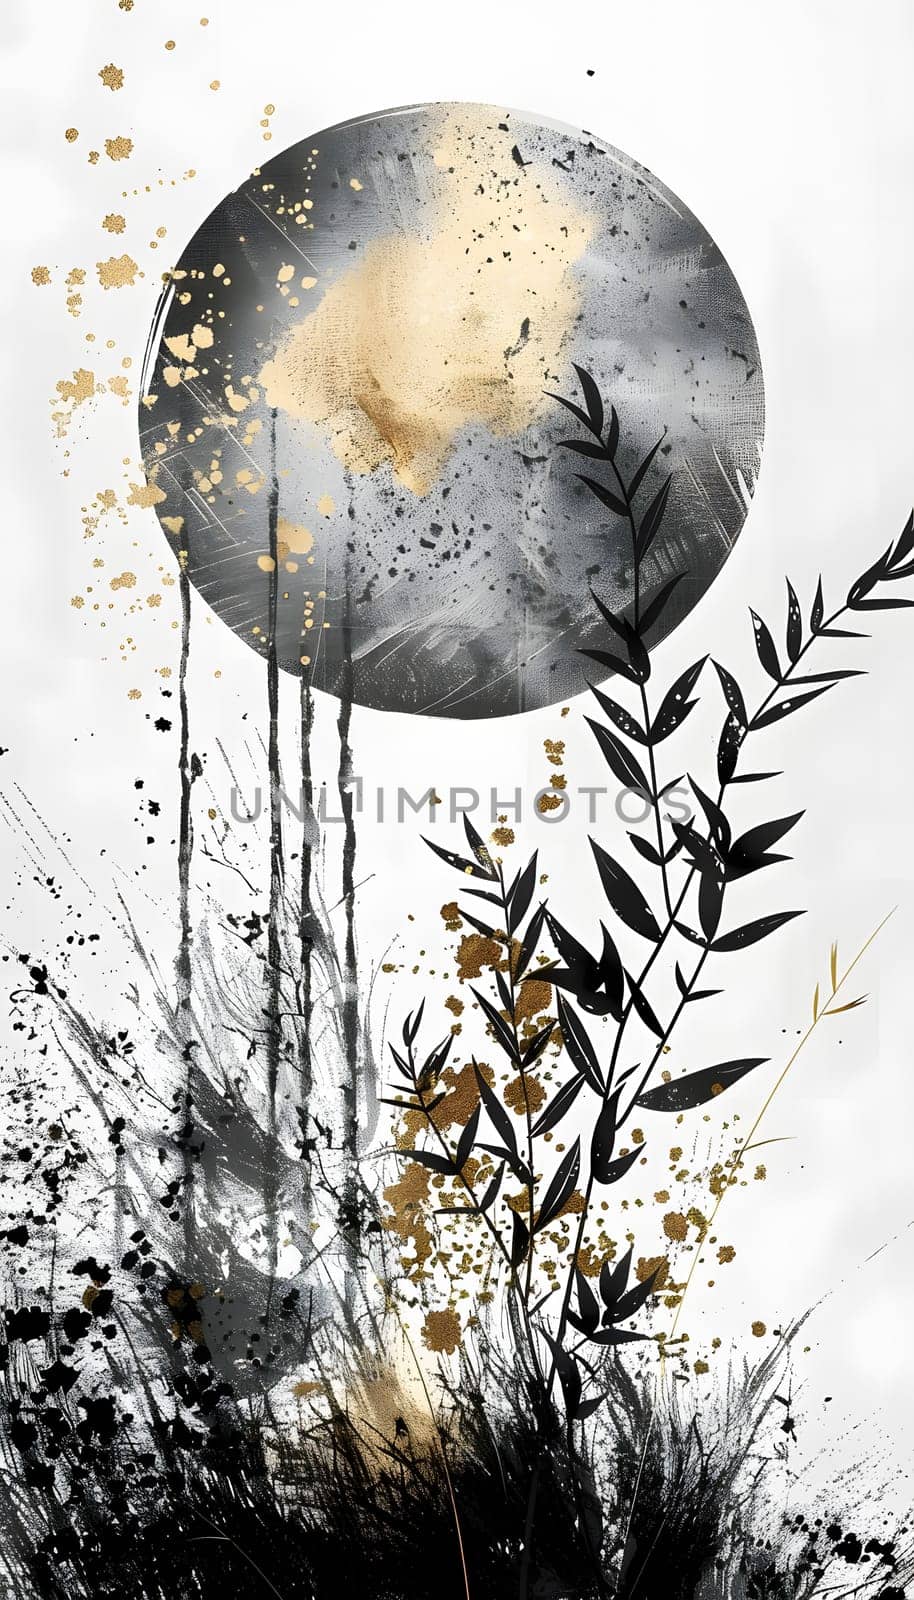 A stunning black and gold painting of a circle with decorative leaves, inspired by nature and art, set against a clean white background